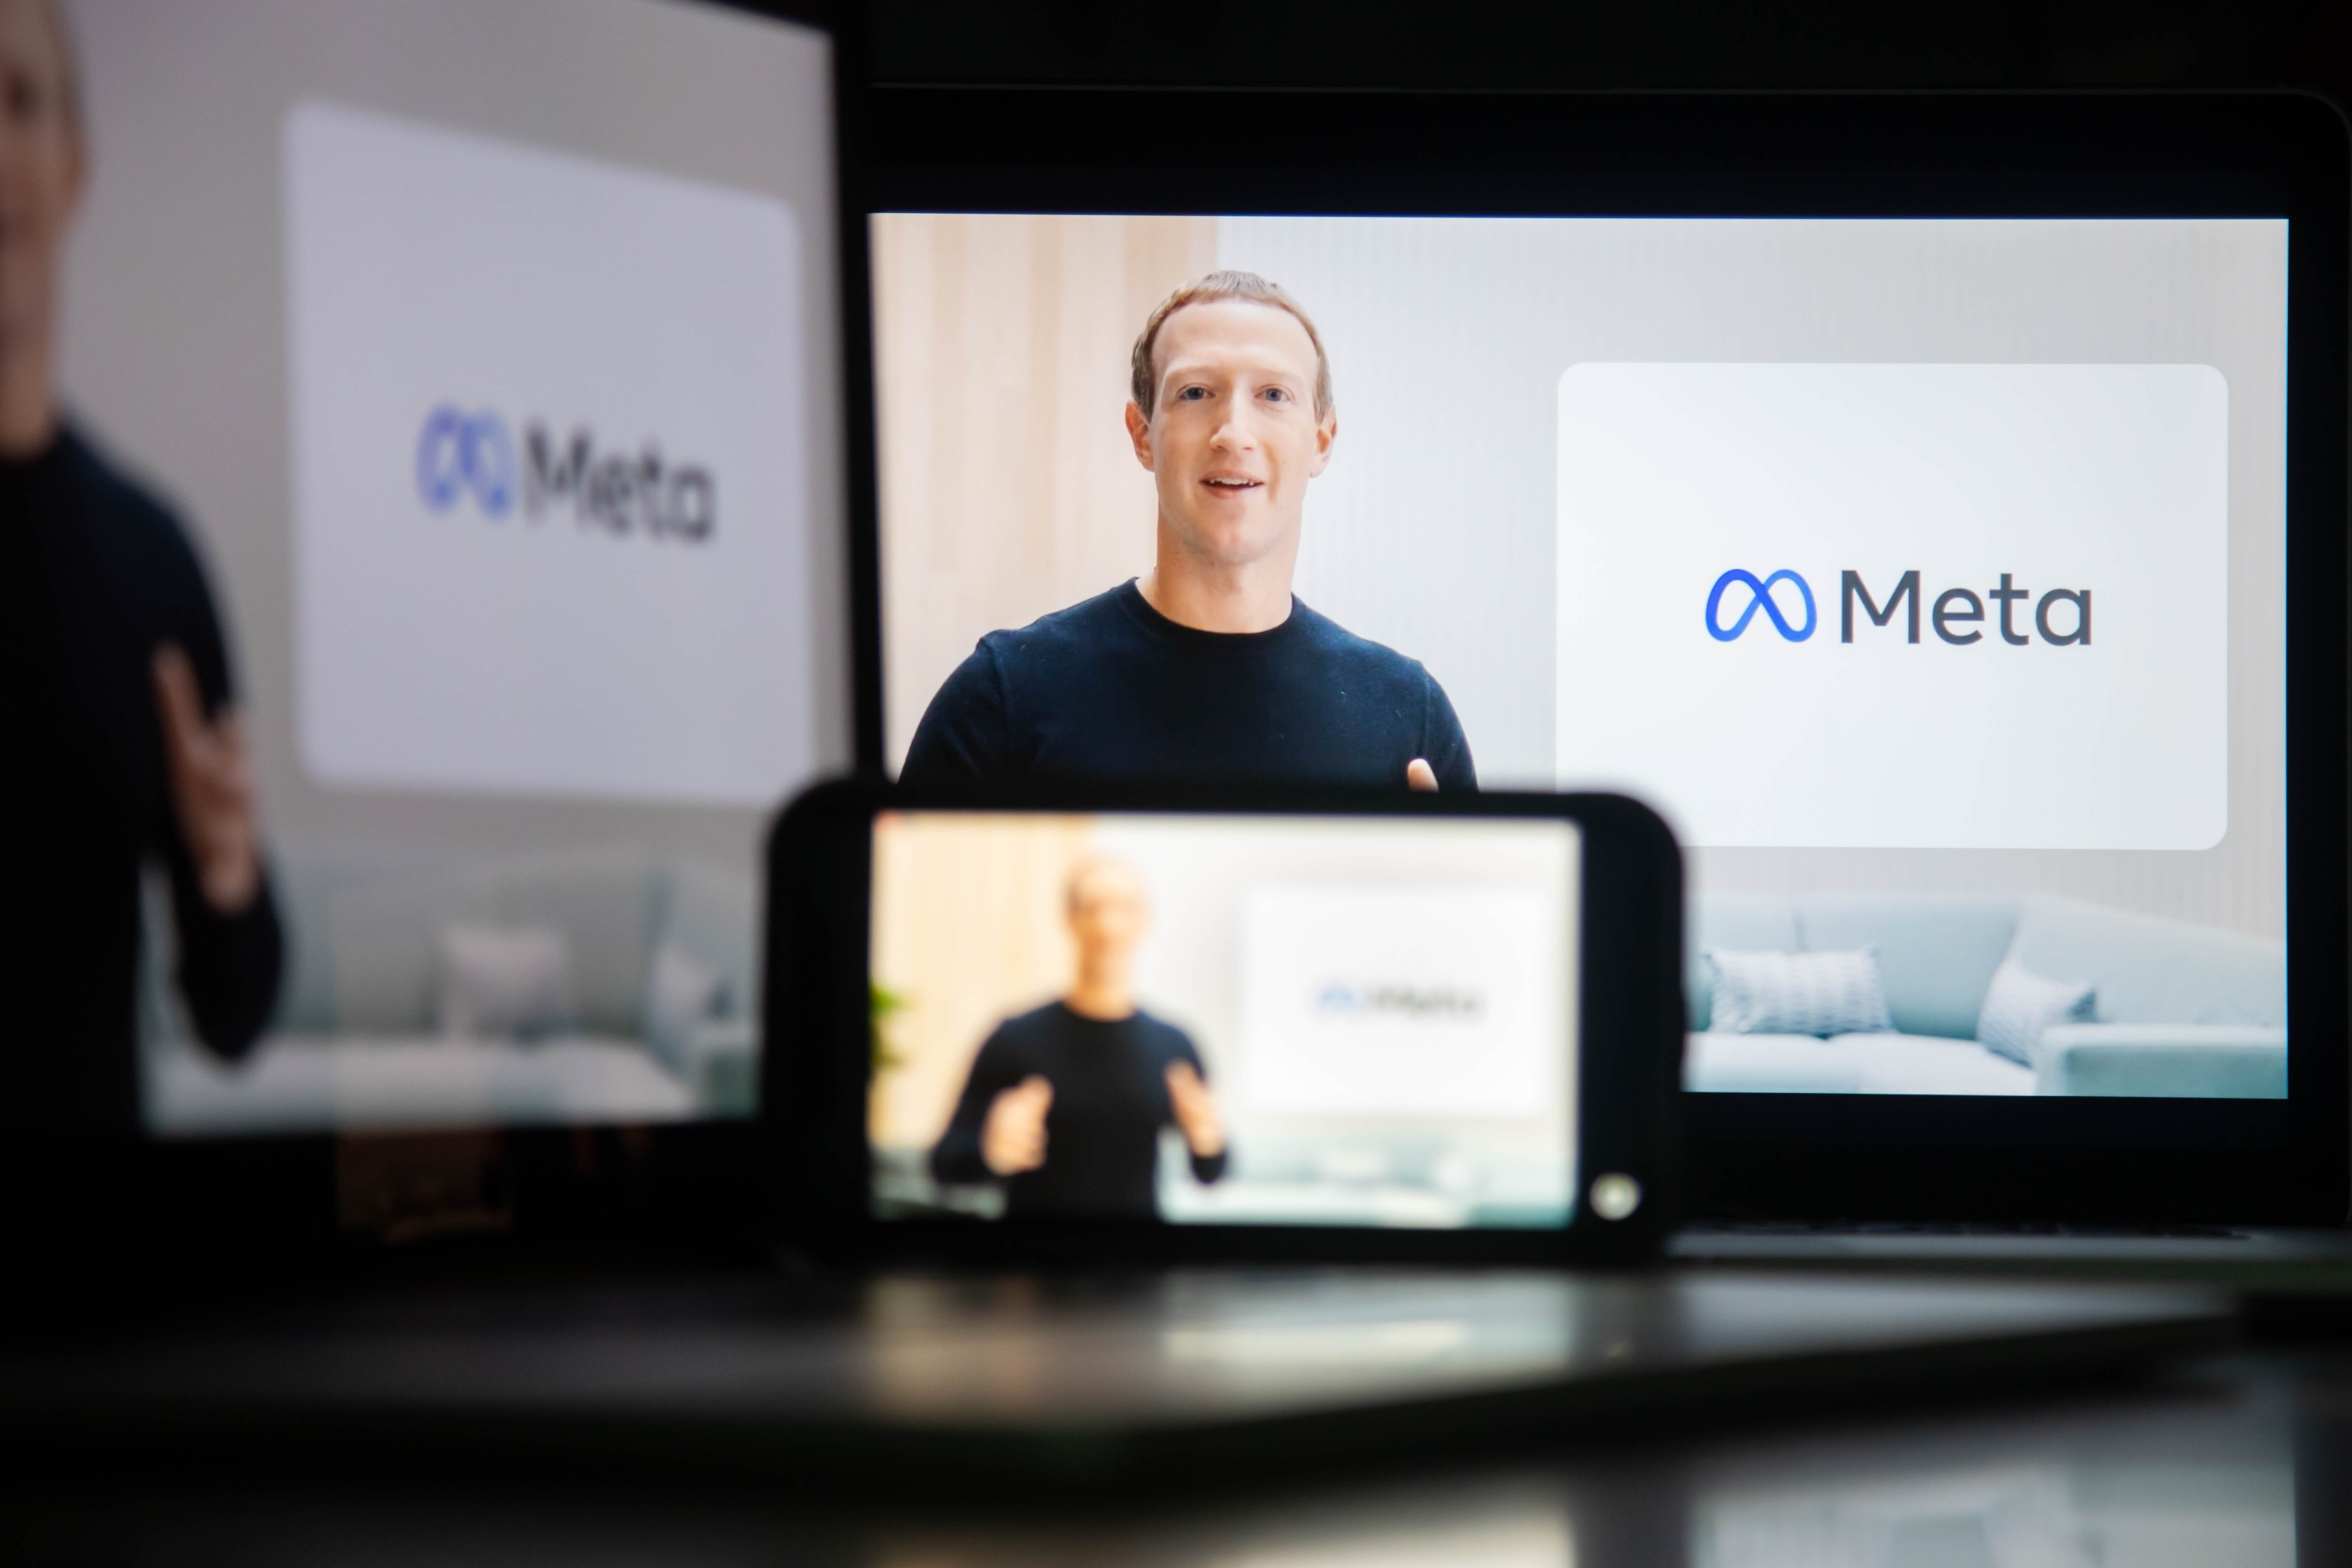 Three screens showing an image of Mark Zuckerberg and the name Meta with its logo.